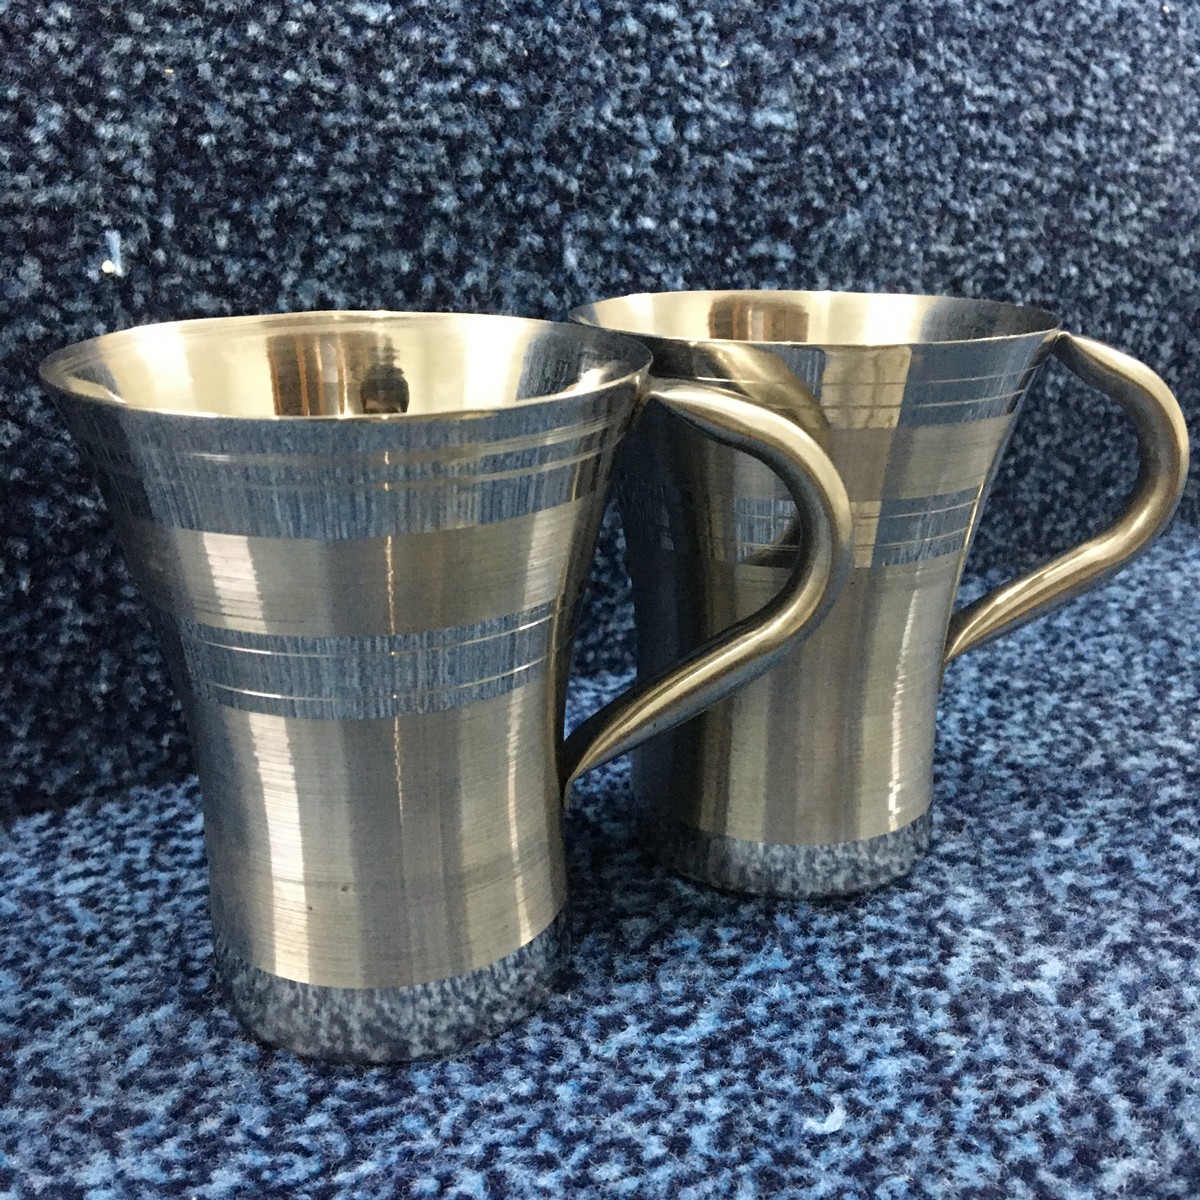 Stainless Steel Cup / Mug For Tea And Coffee